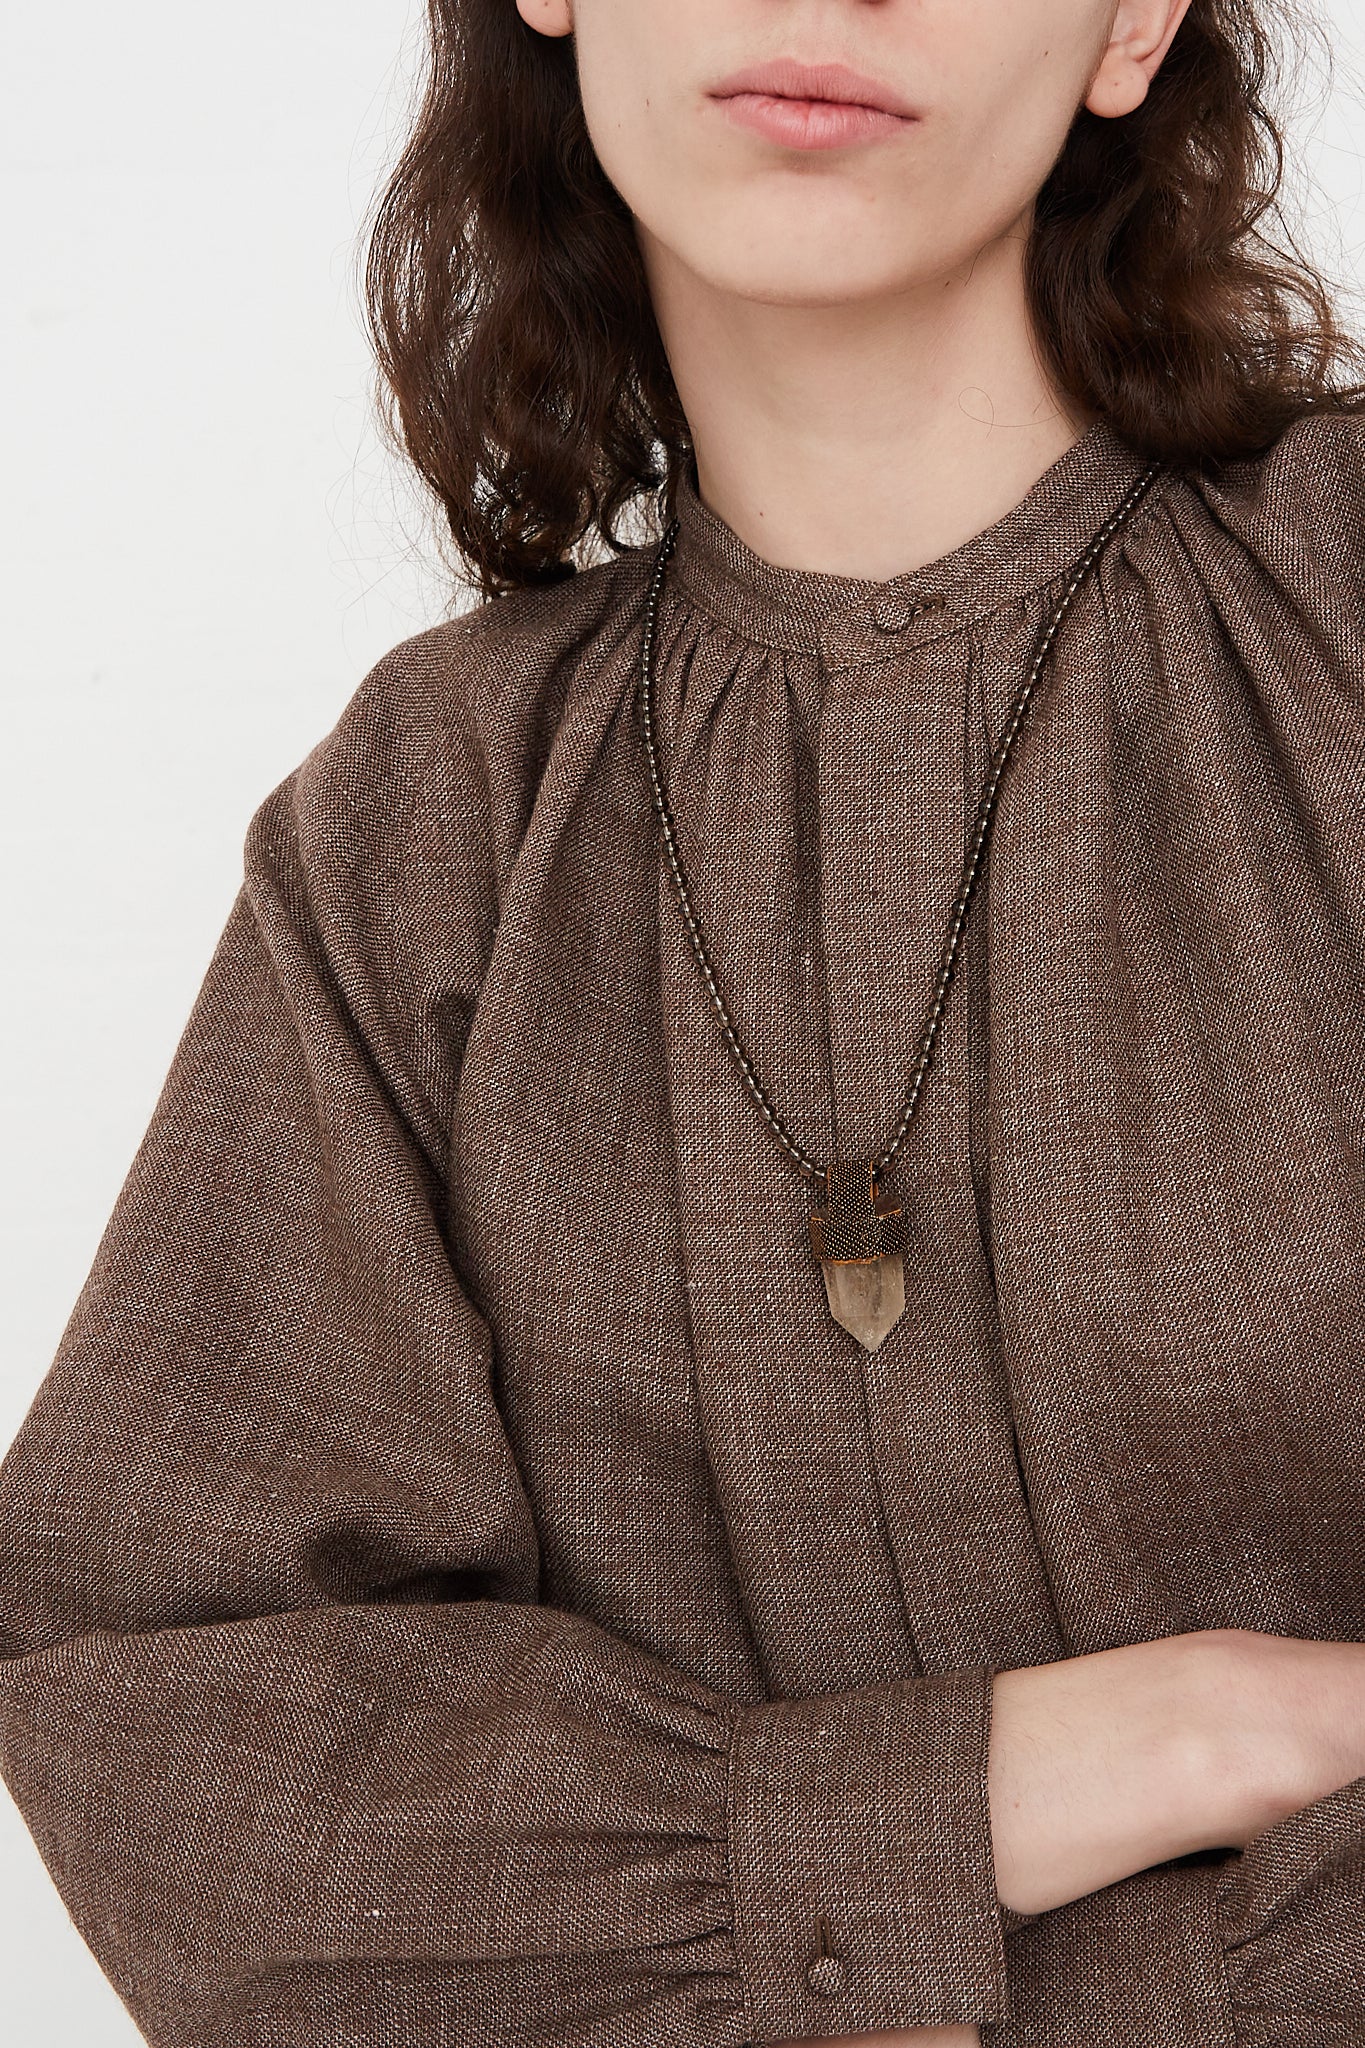 A woman wearing a brown shirt and a Long Pendulum Necklace in Smoky Quartz Beads Brown, Citrine Crystal by Robin Mollicone.